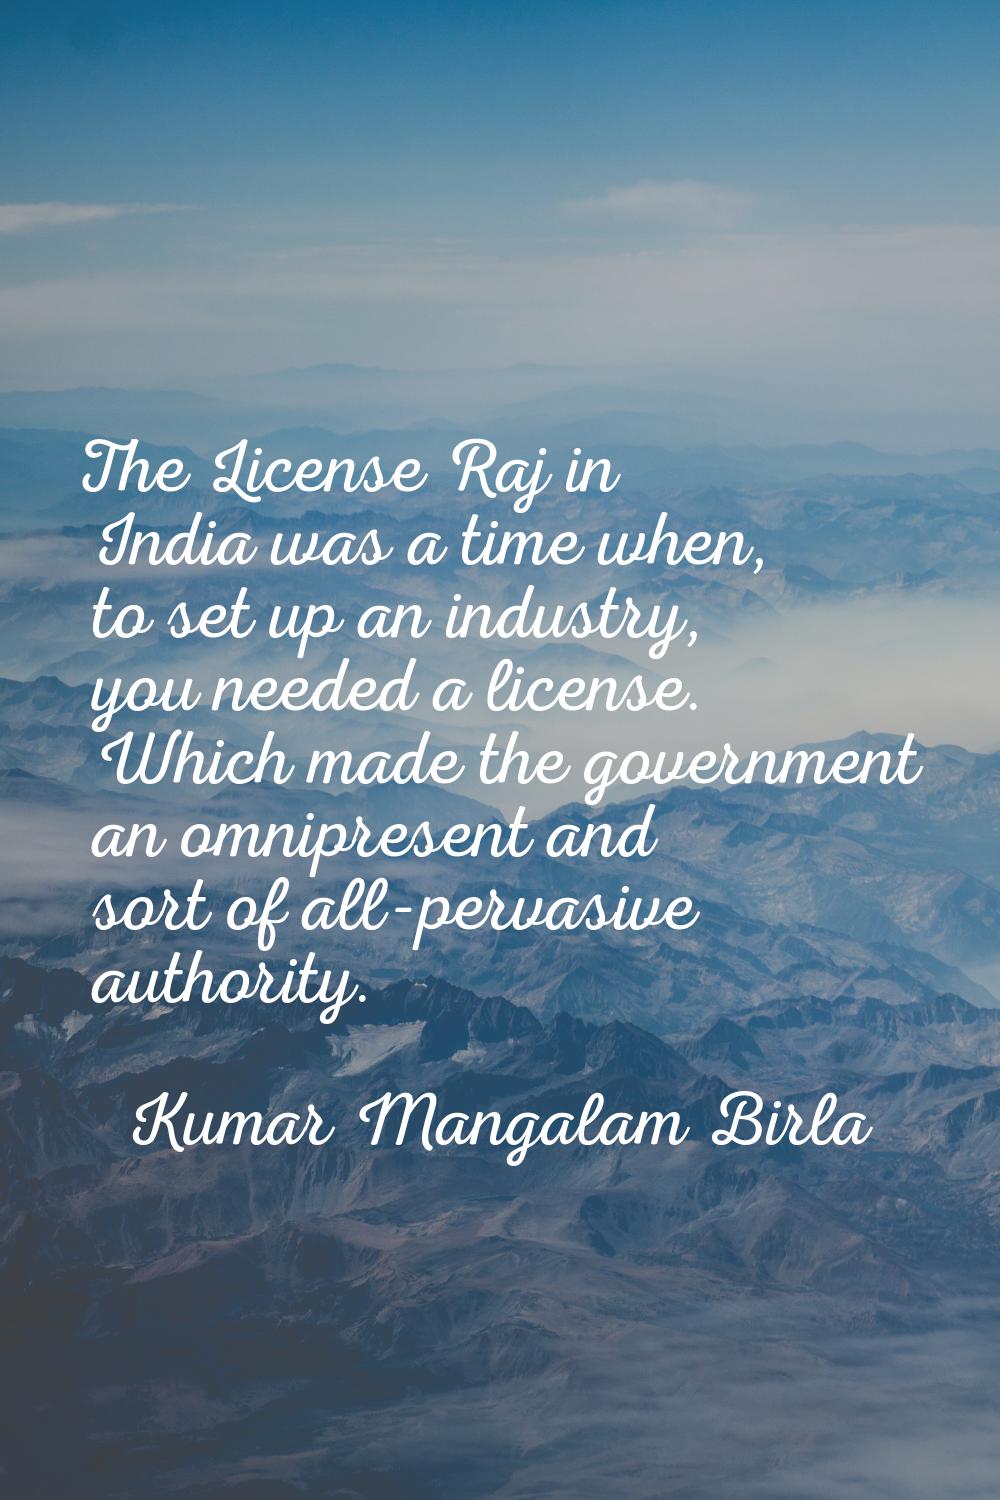 The License Raj in India was a time when, to set up an industry, you needed a license. Which made t